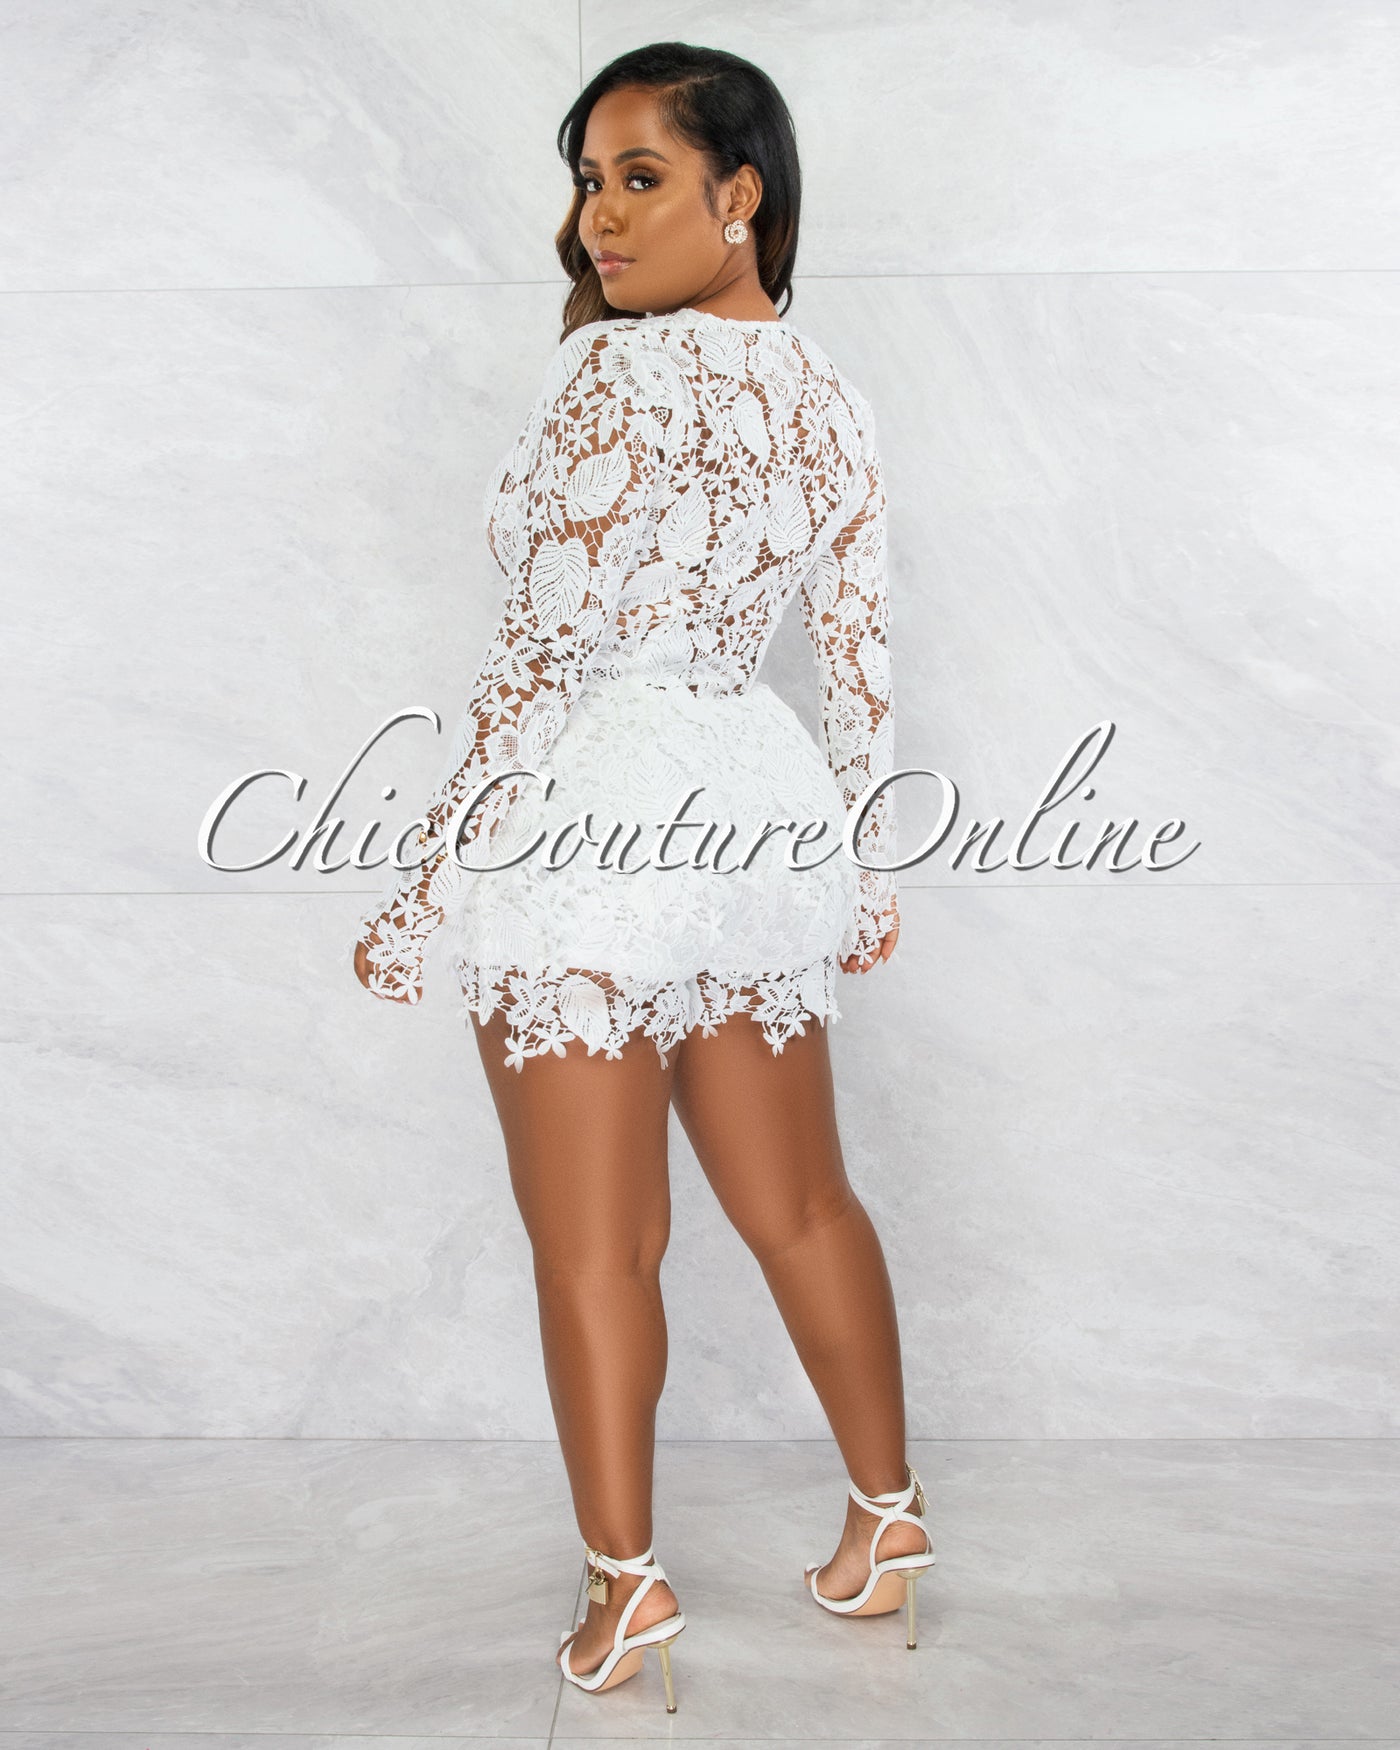 *Carencia Off-White Crochet Sheer Suit Shorts Set